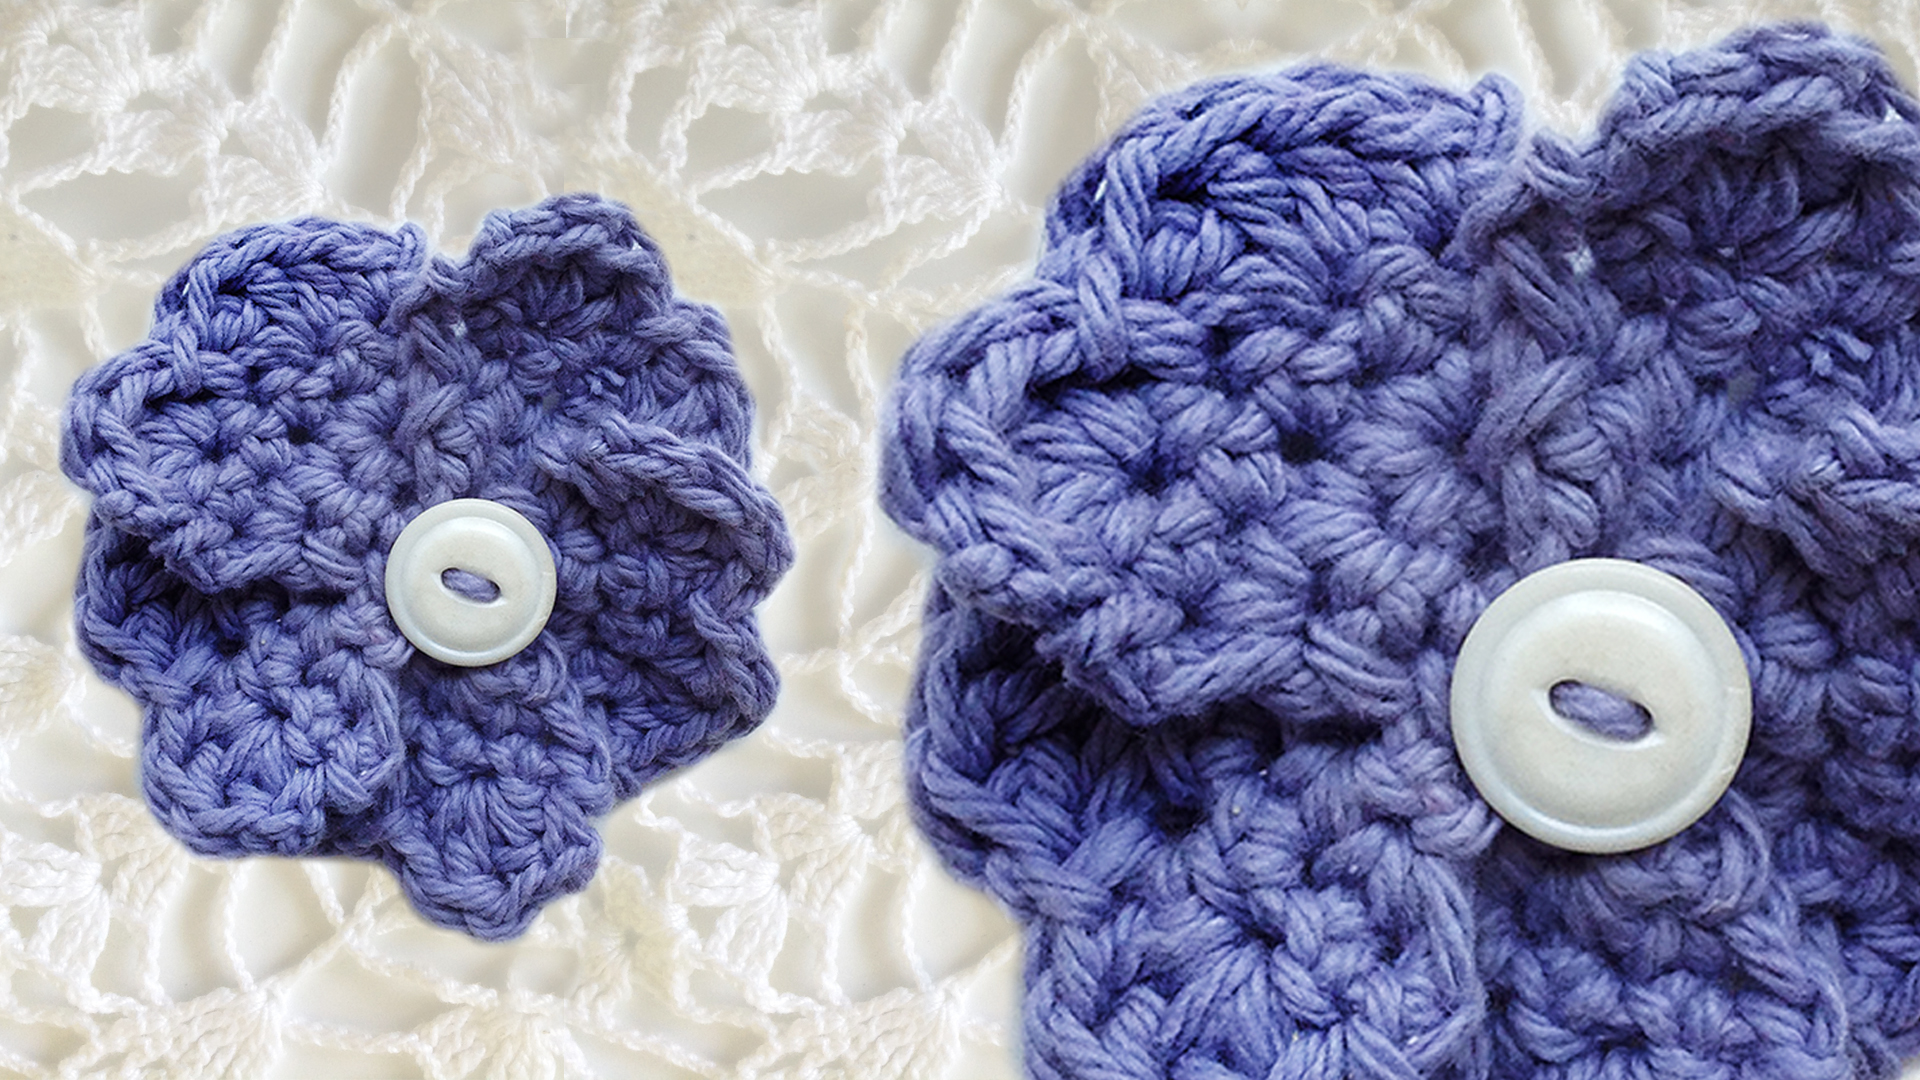 maggies-crochet-free-pattern-violet-close-up